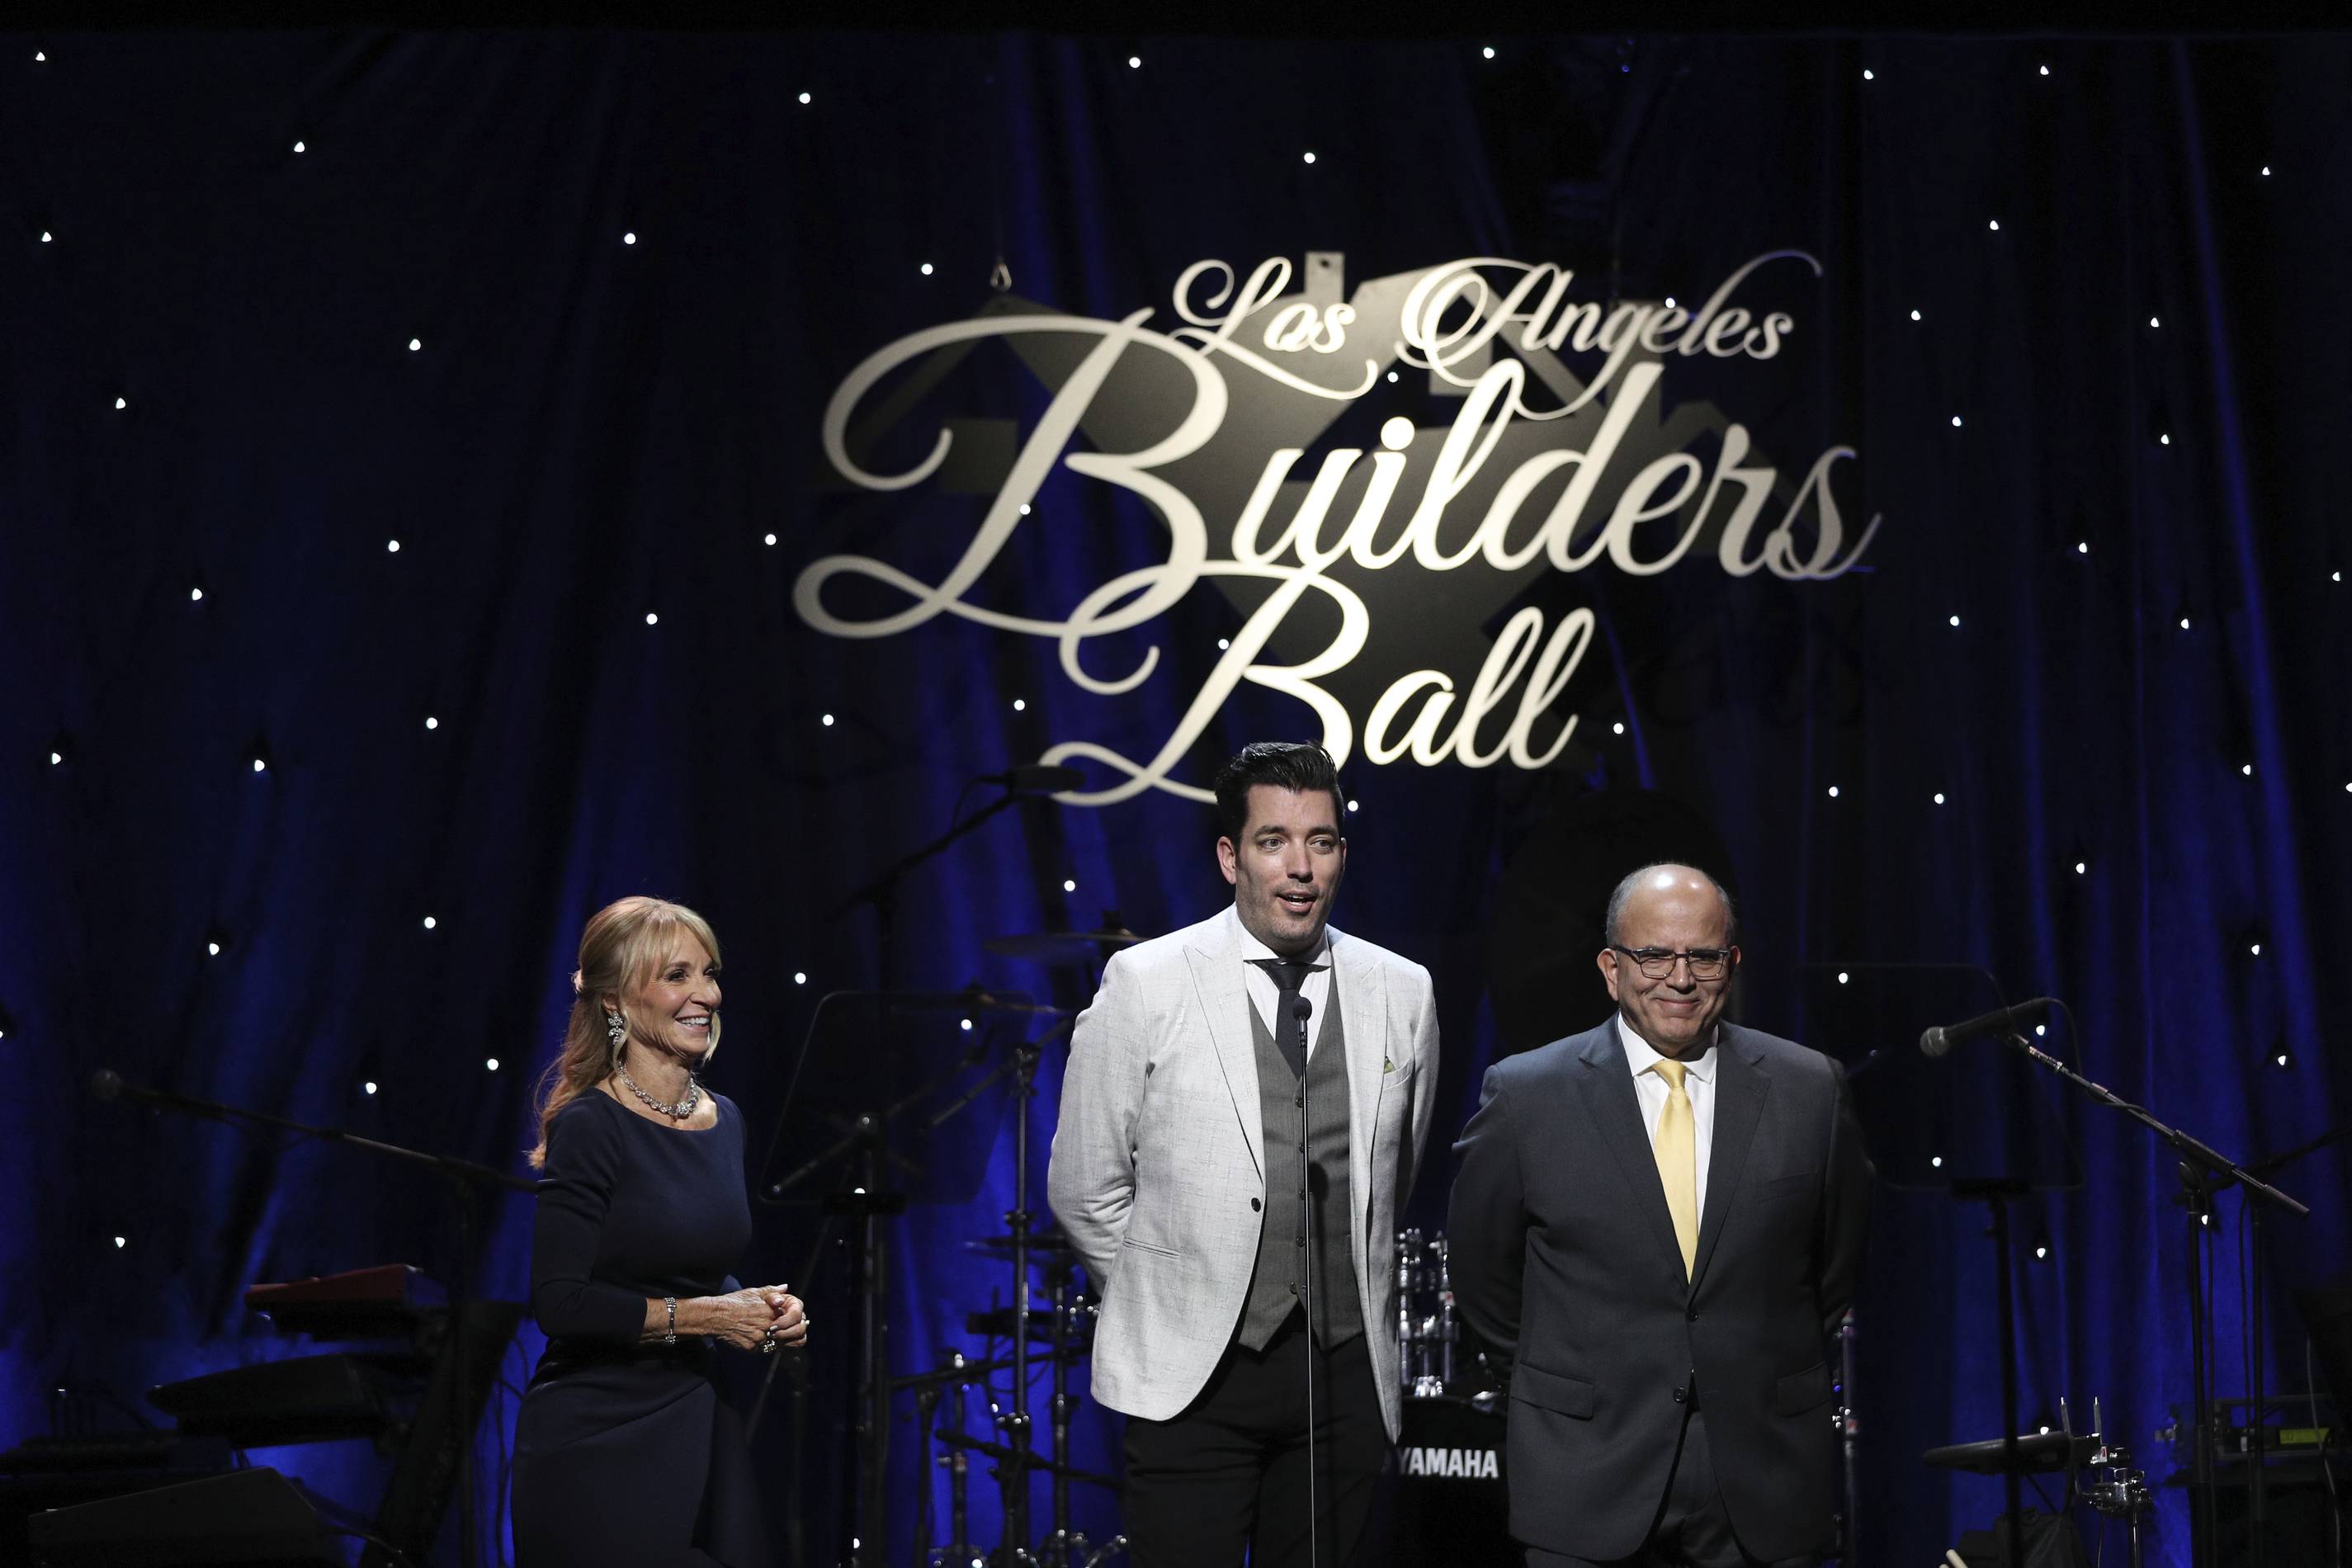 The Builders Ball